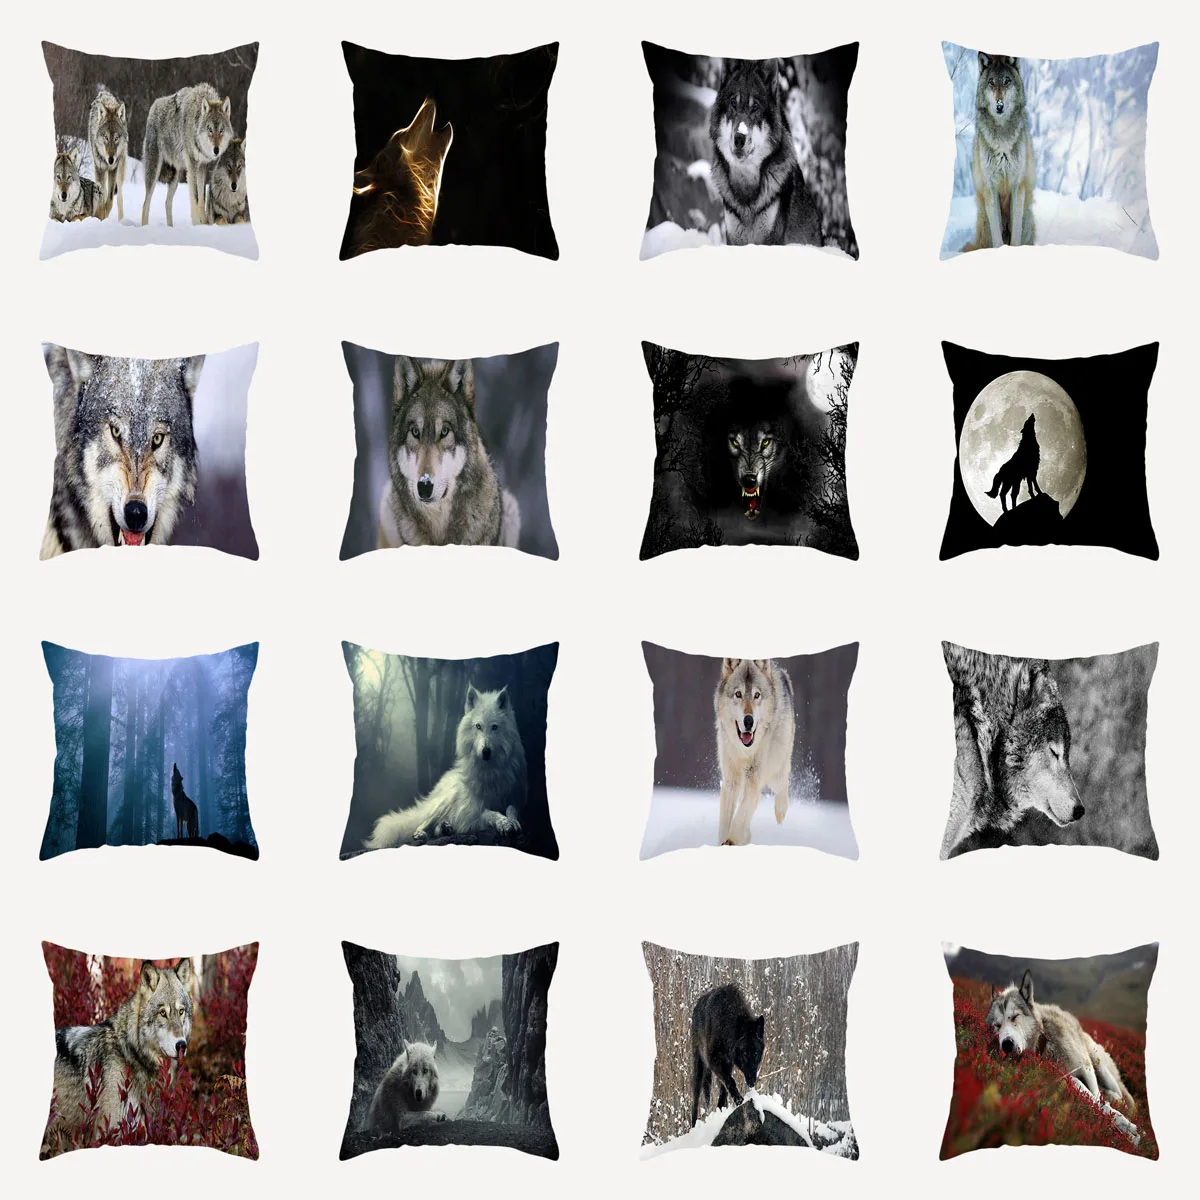 

ZHENHE Animal Wolf Scenery Pattern Pillow Cover Double Sided Printing Cushion Cover for Bedroom Sofa Decor 18x18 Inch（45x45cm）